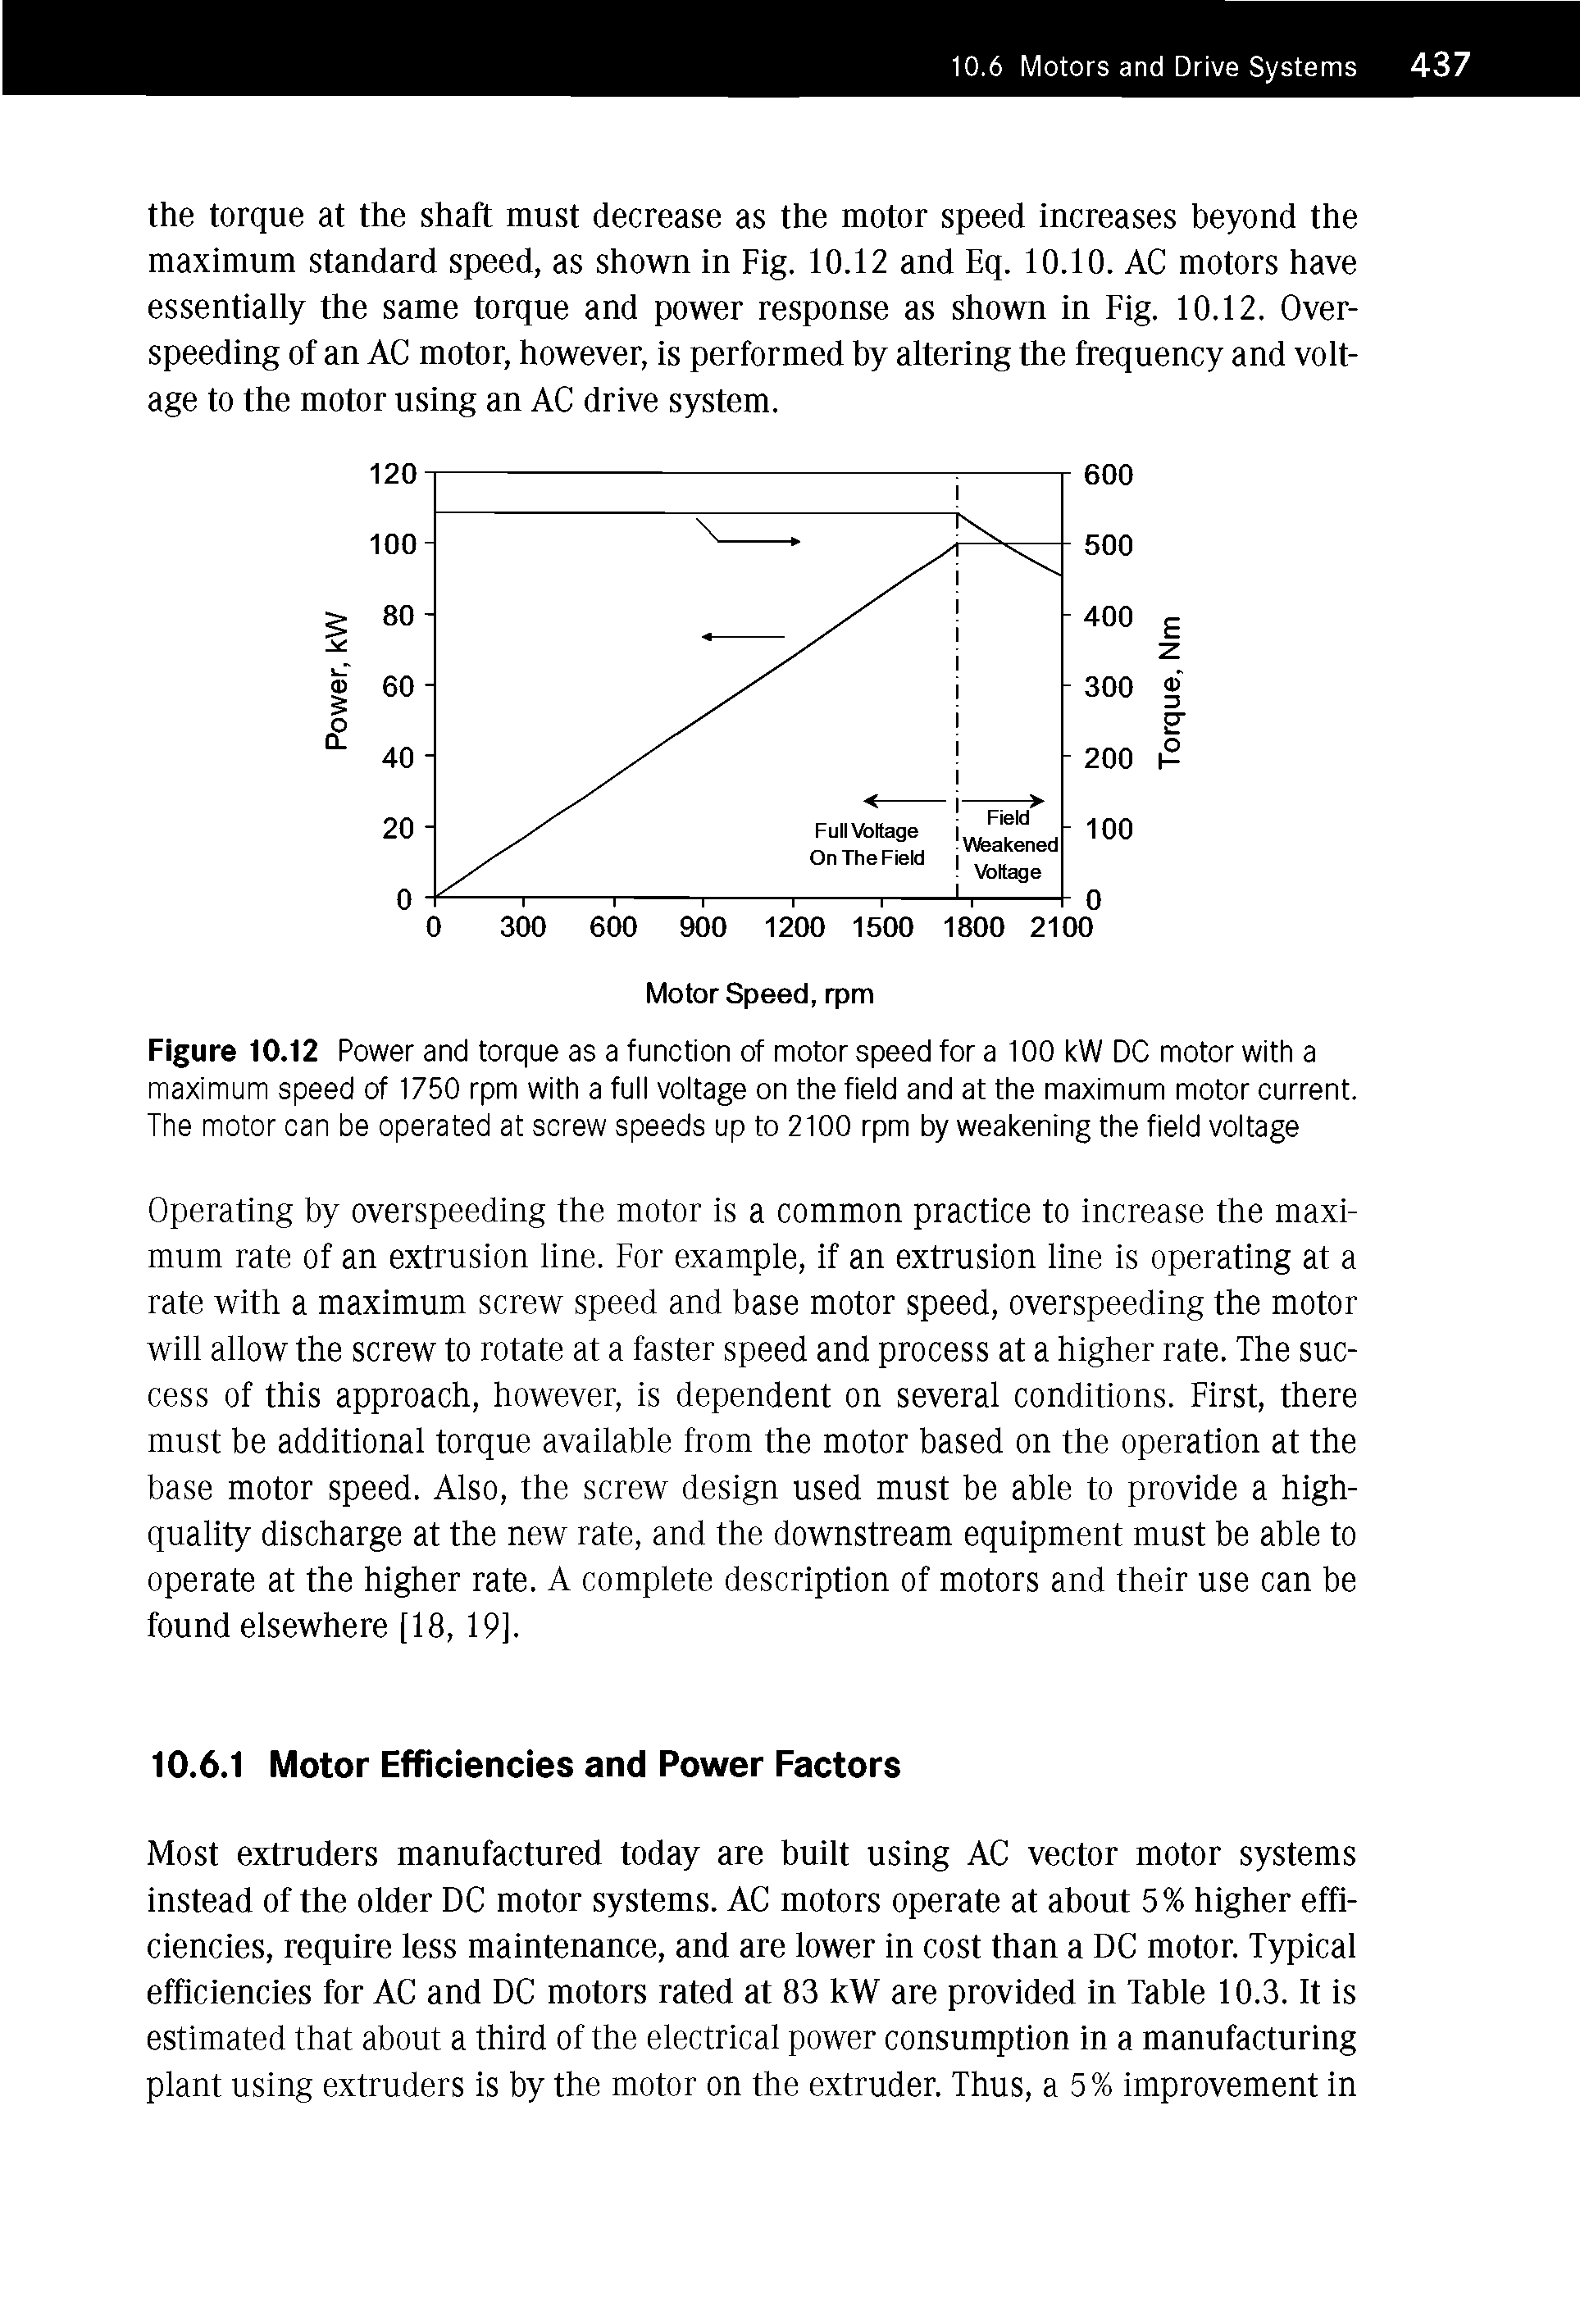 Figure 10.12 Pow/er and torque as a function of motor speed for a 100 kW DC motor w/ith a maximum speed of 1750 rpm w/ith a full voltage on the field and at the maximum motor current. The motor can be operated at screw speeds up to 2100 rpm by weakening the field voltage...